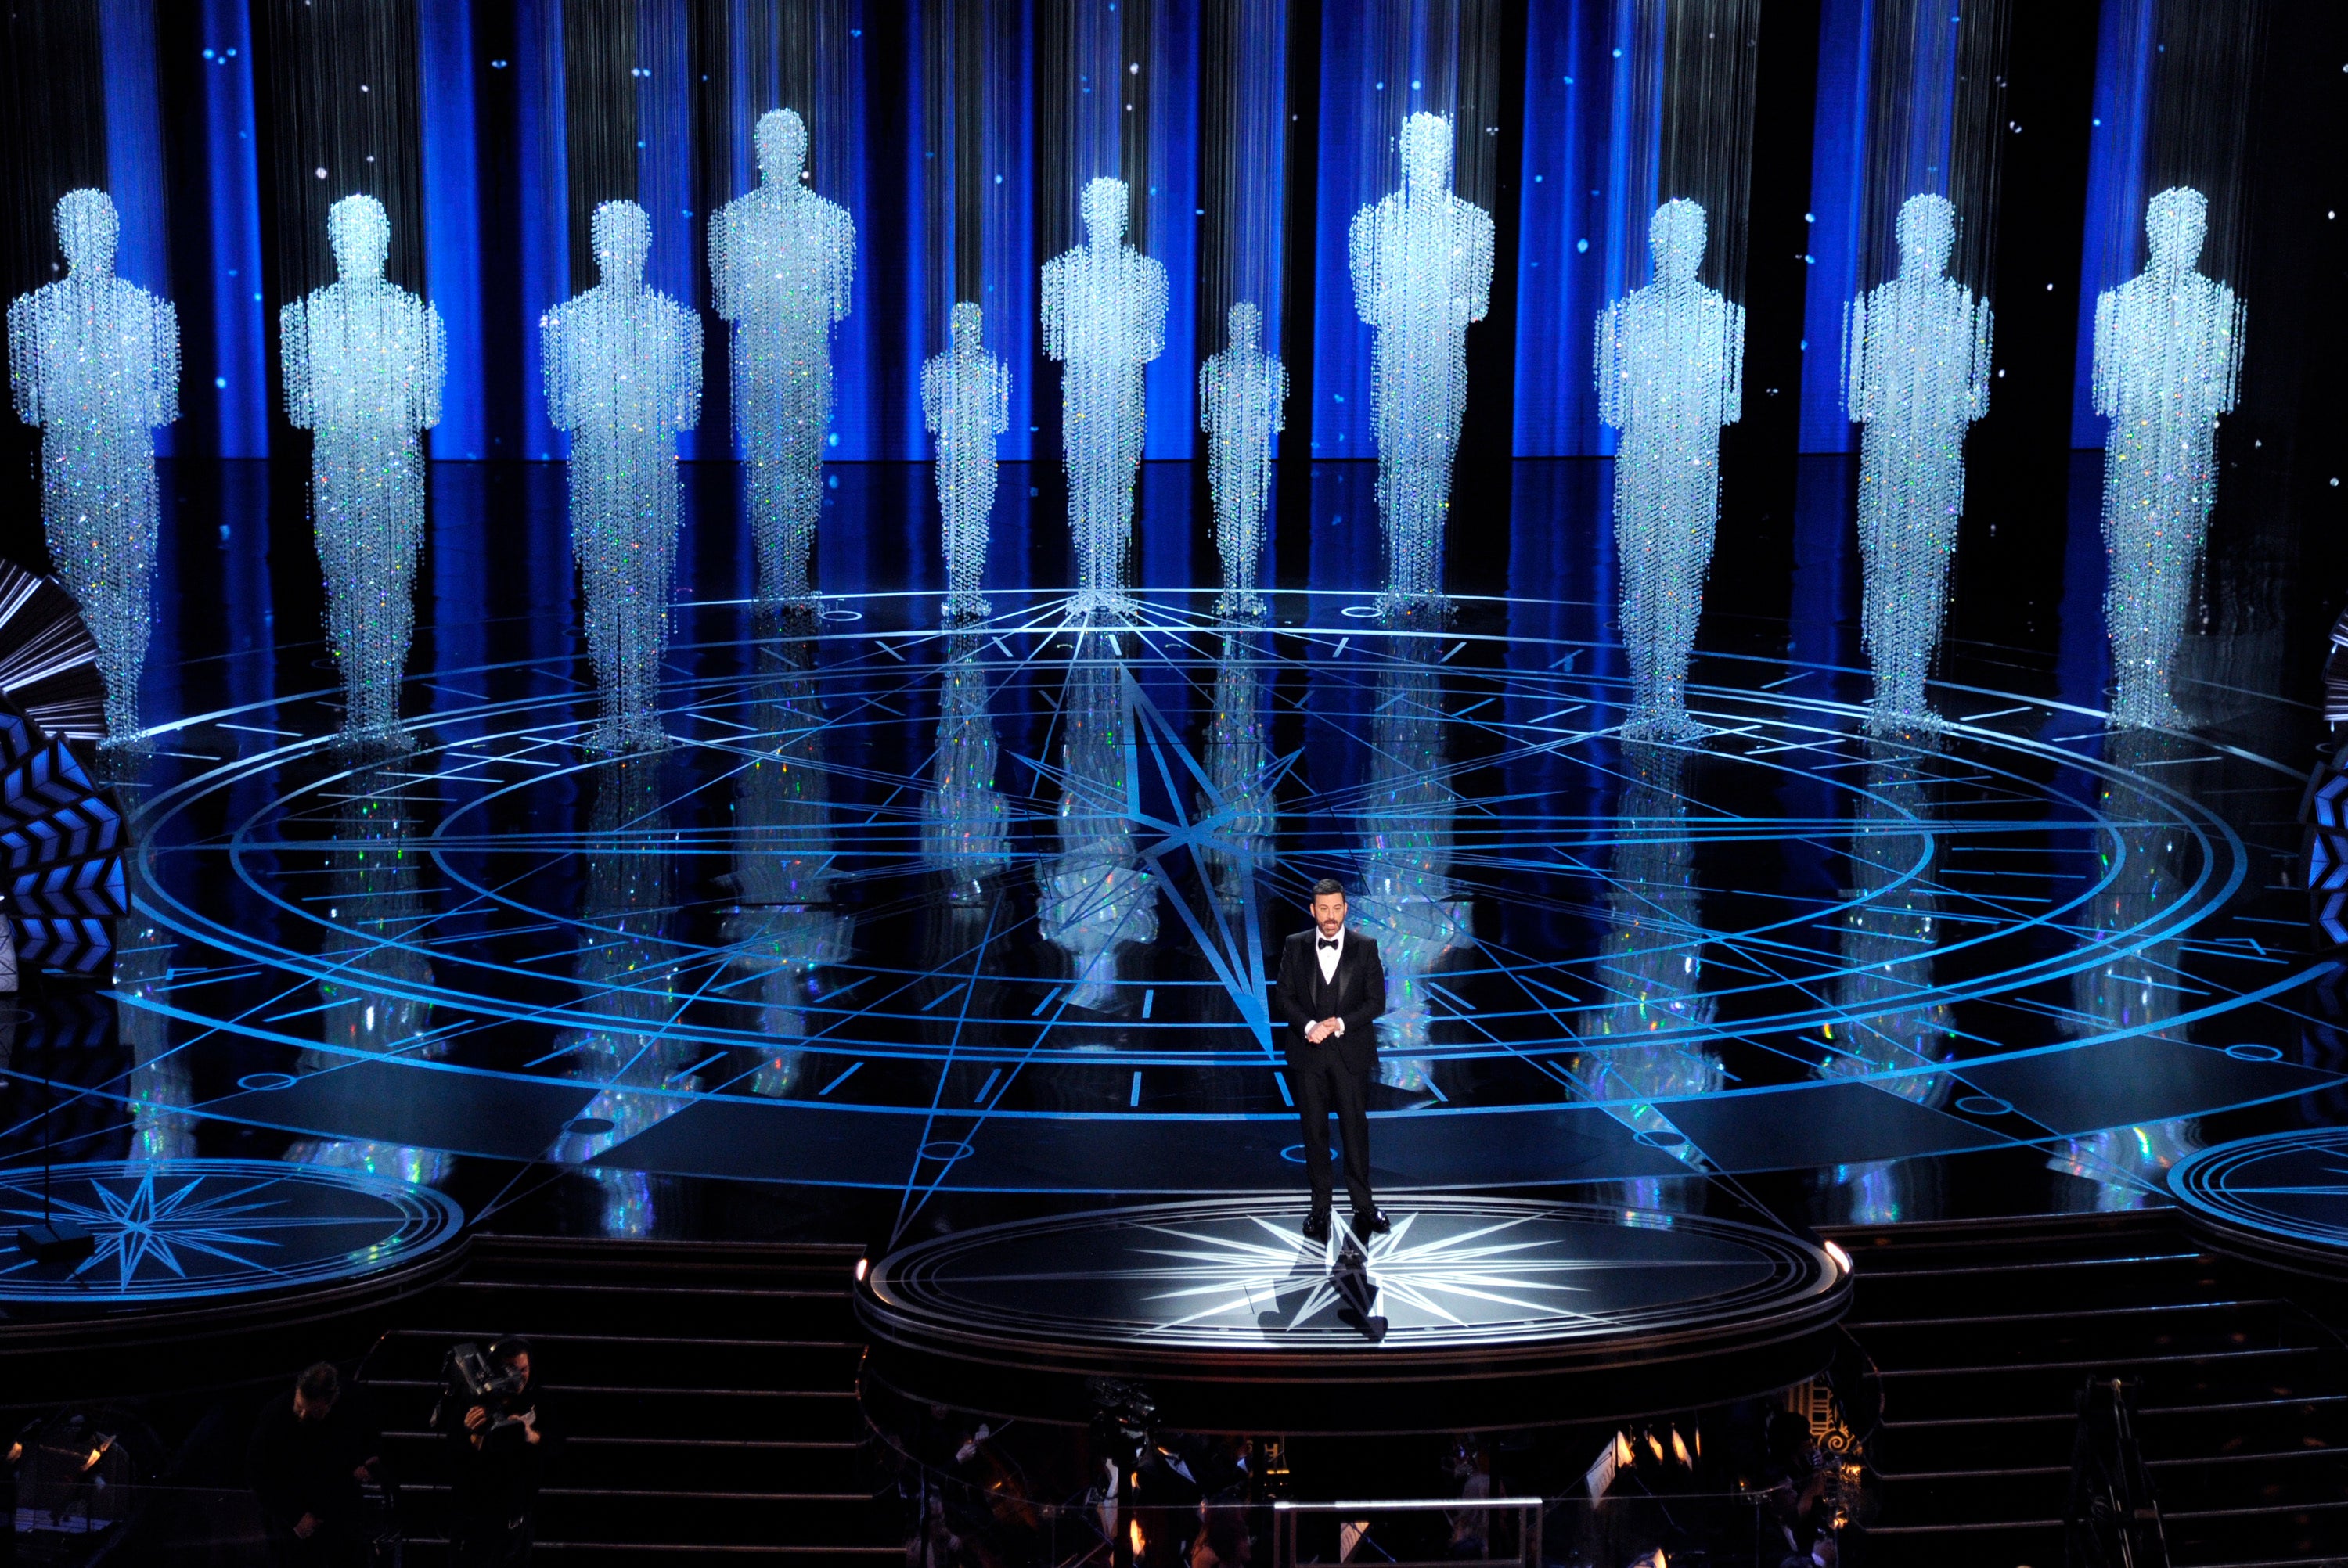 Will the Oscars be a `who cares' moment as ratings dive? Nielsen San